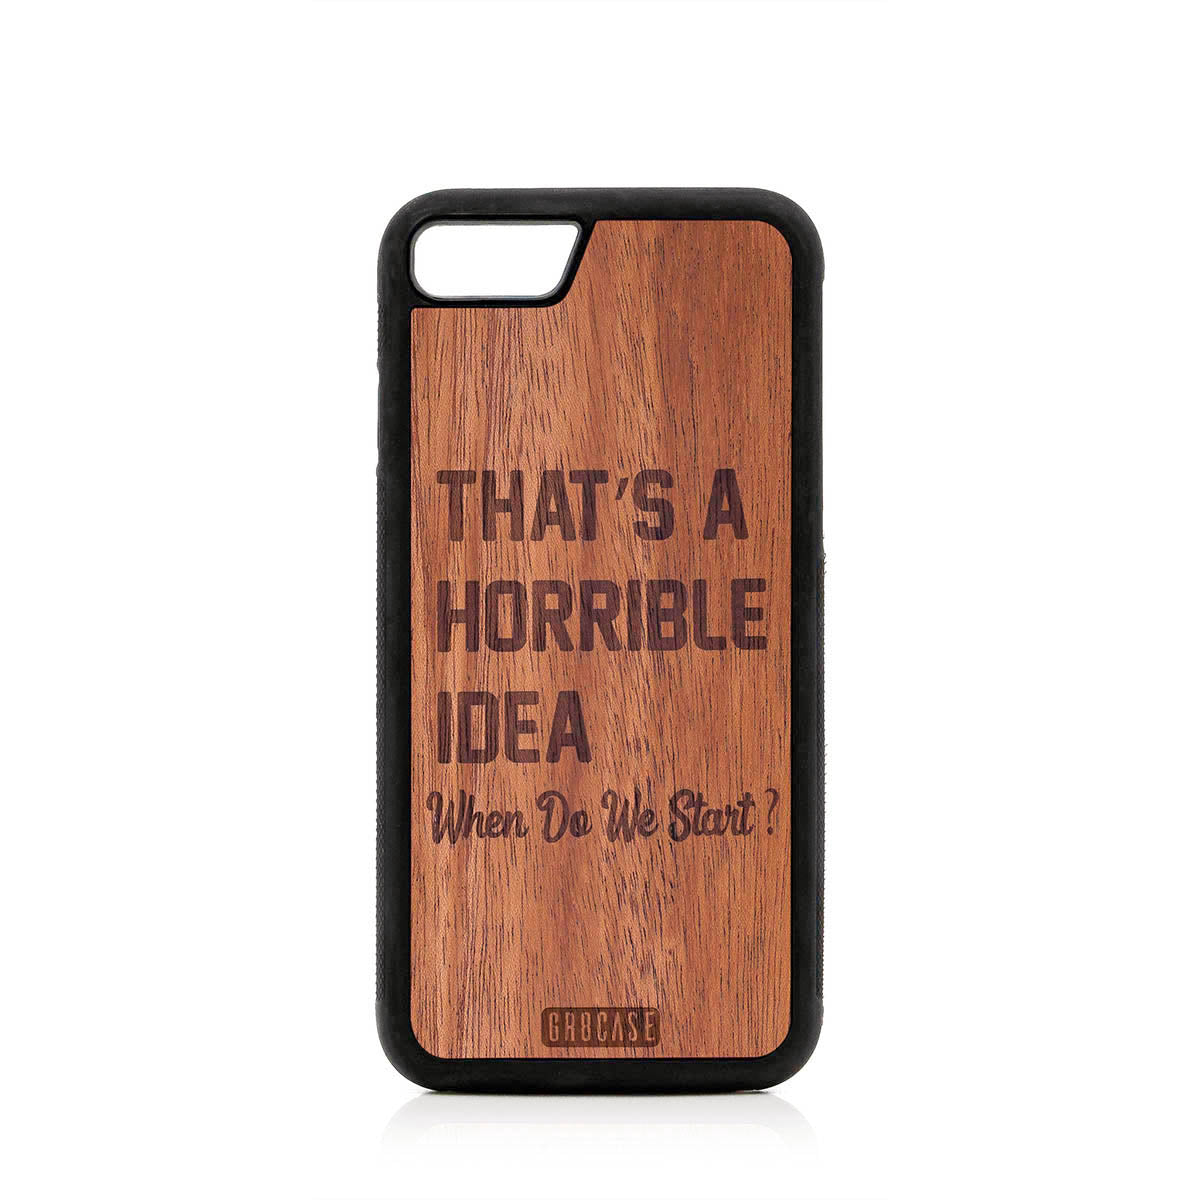 That's A Horrible idea When Do We Start? Design Wood Case For iPhone 7/8